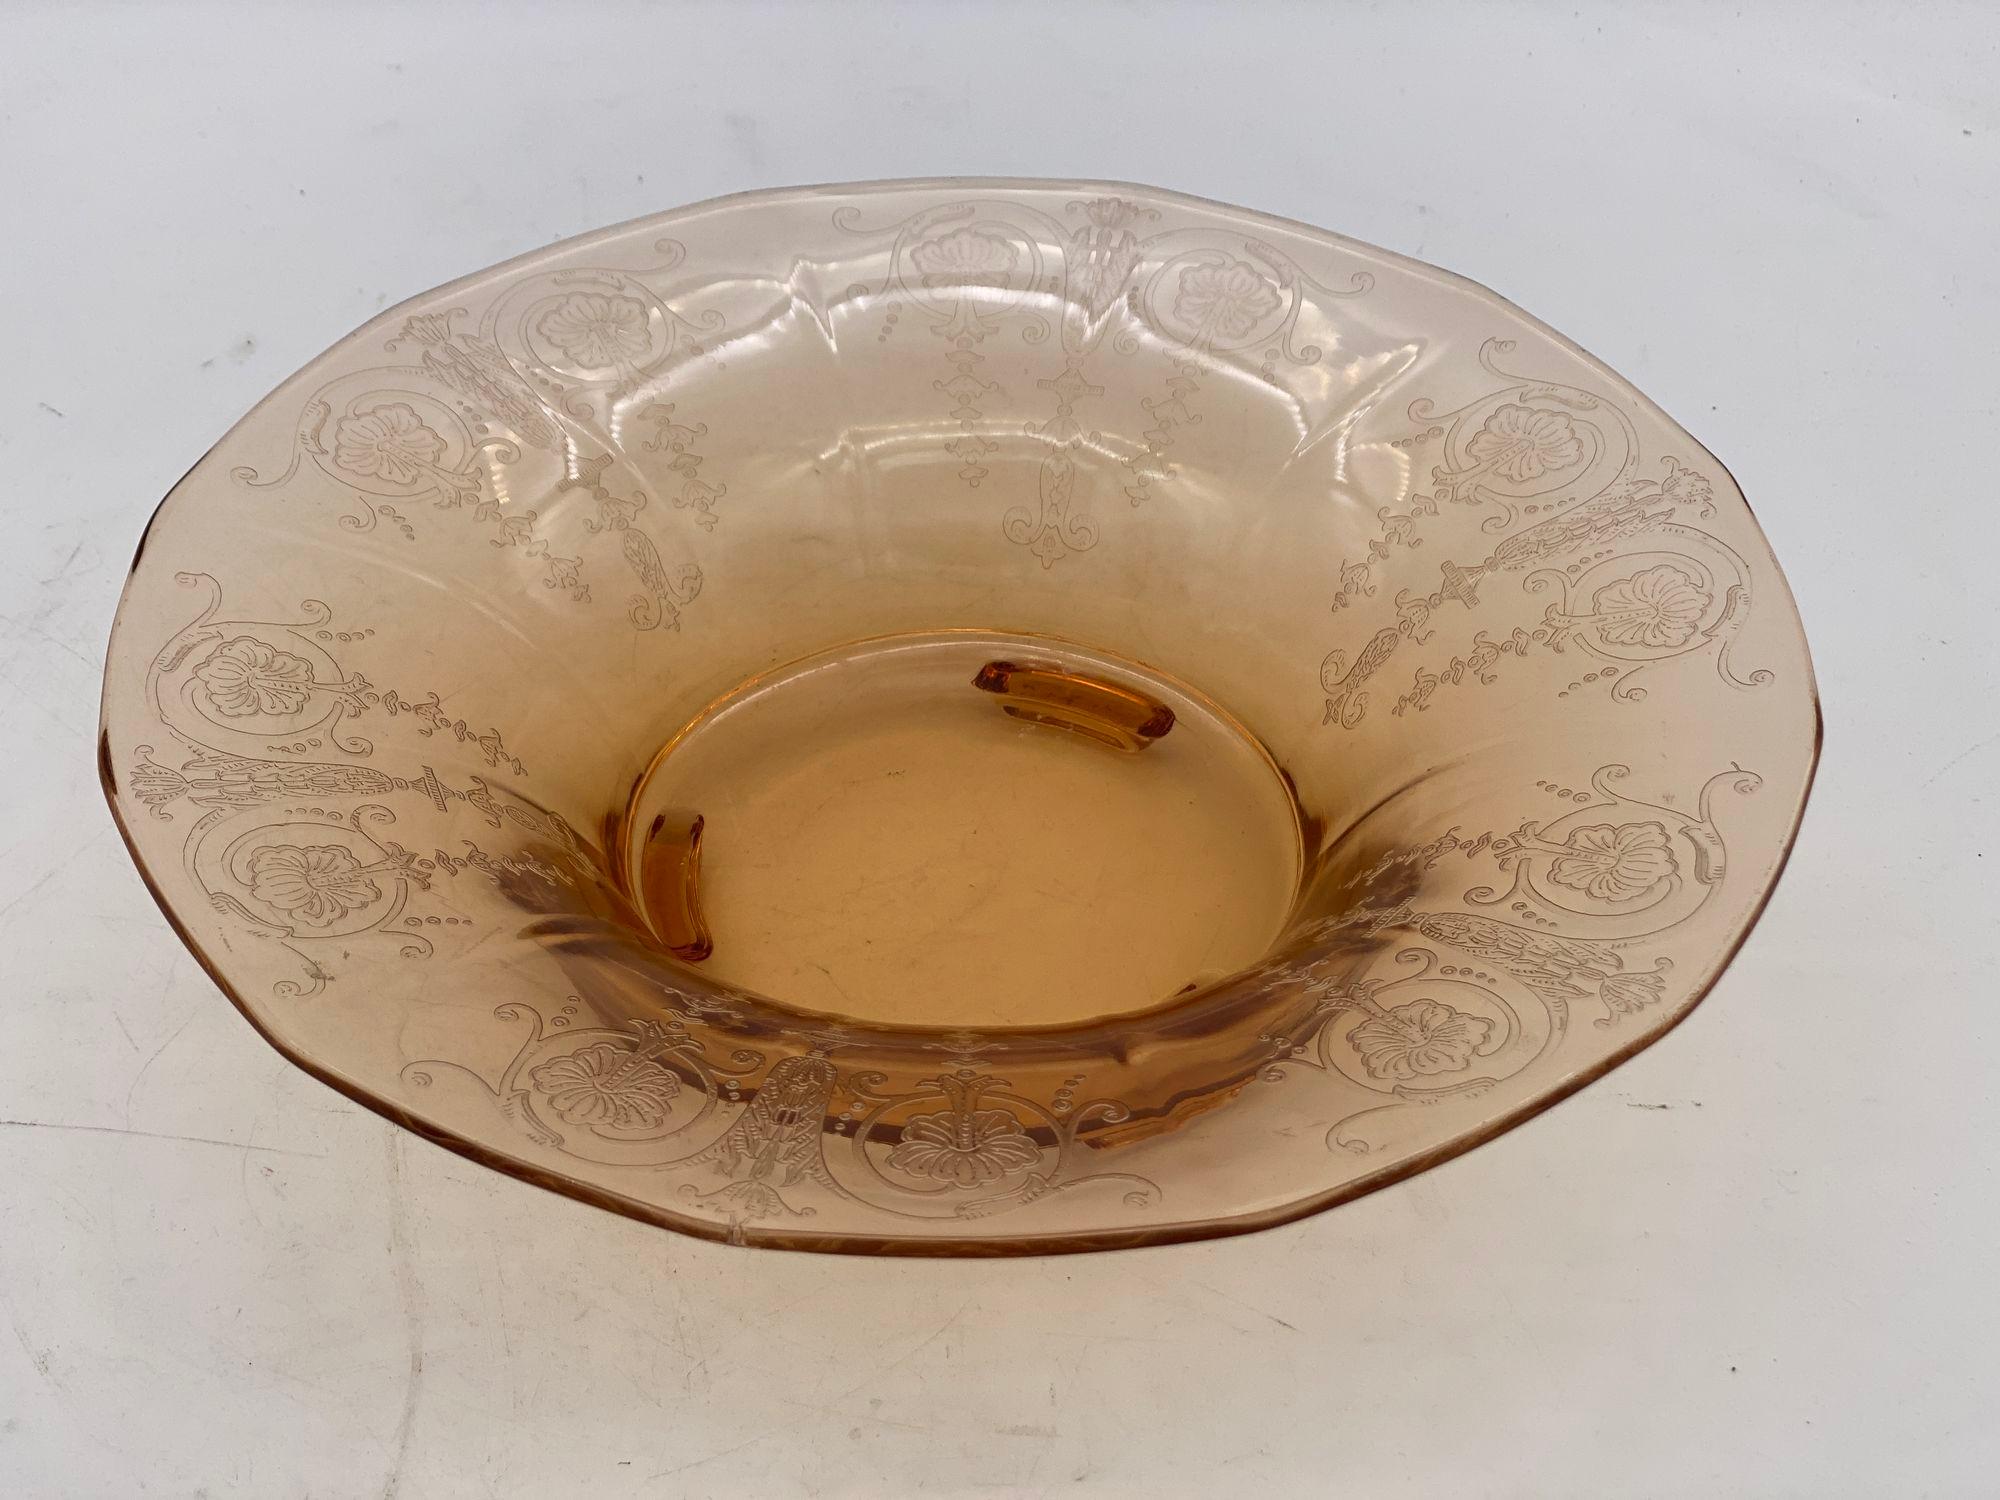 Vintage Bohemian Peach Intaglio Glass Fruit Bowl, Circa 1930 In Excellent Condition For Sale In Van Nuys, CA